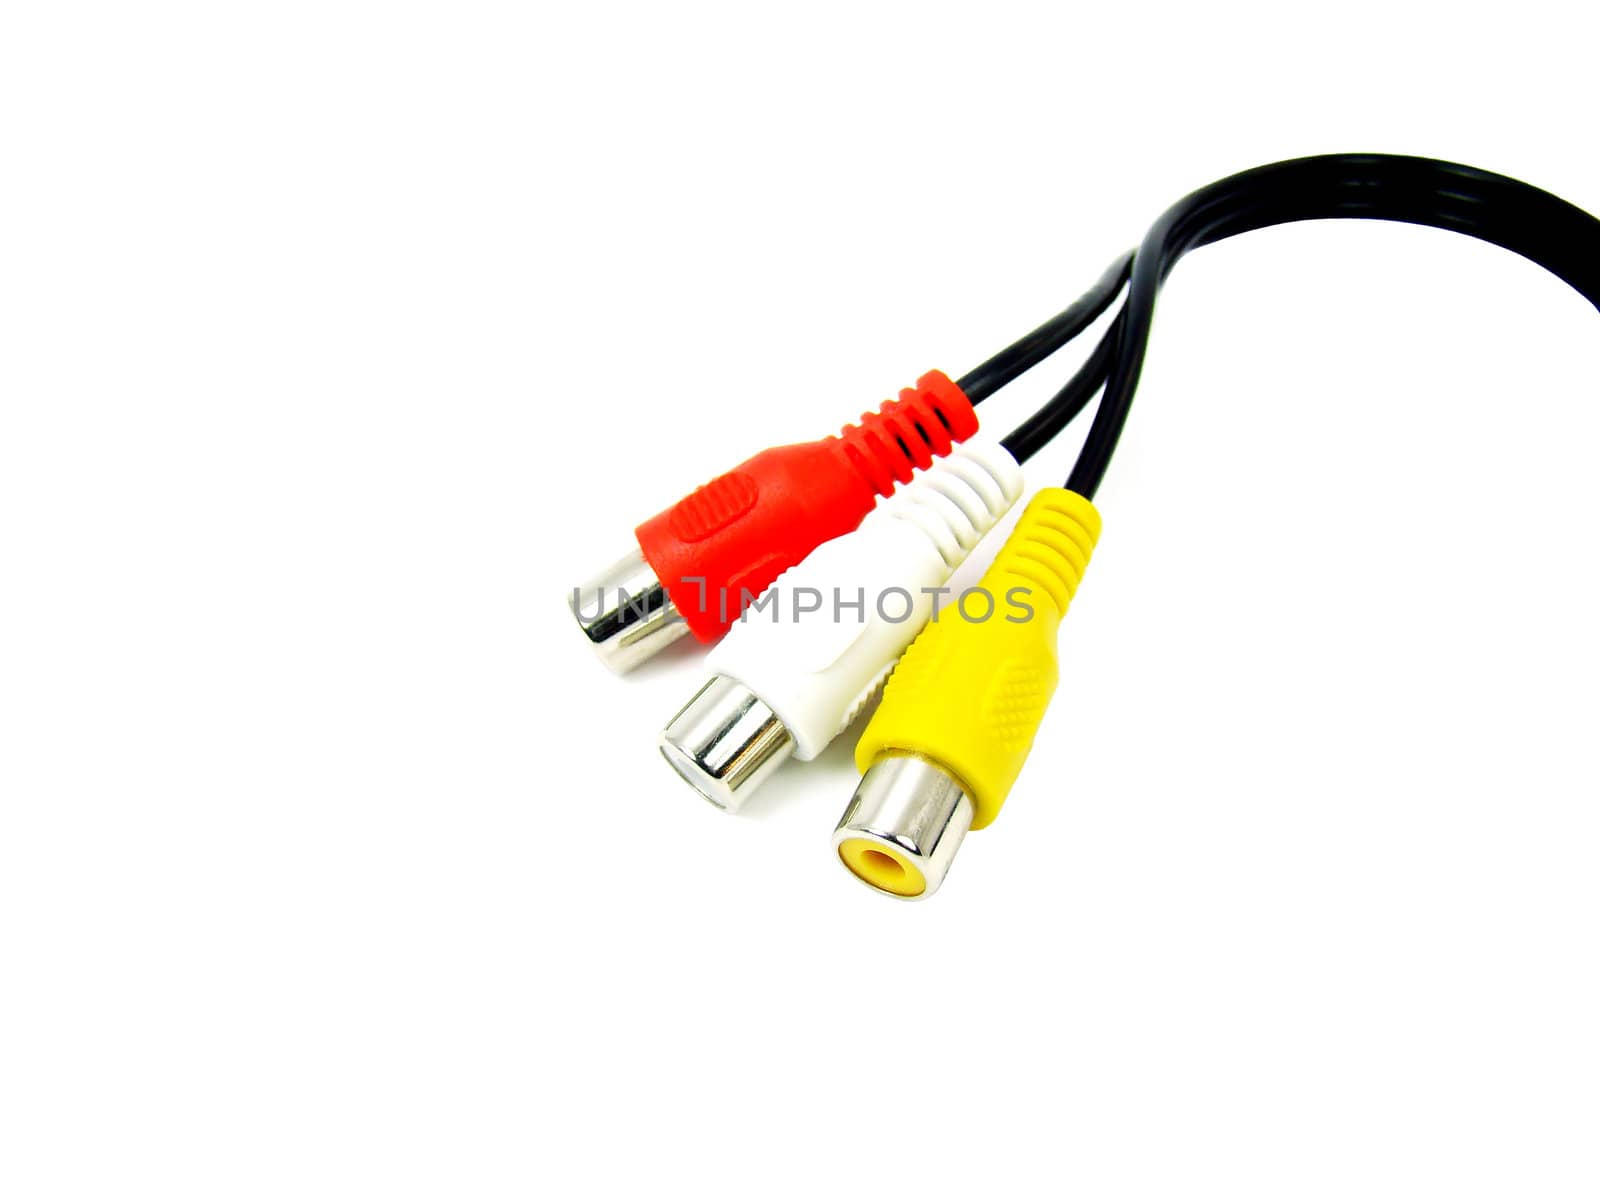 Audio video connector isolated, white background.